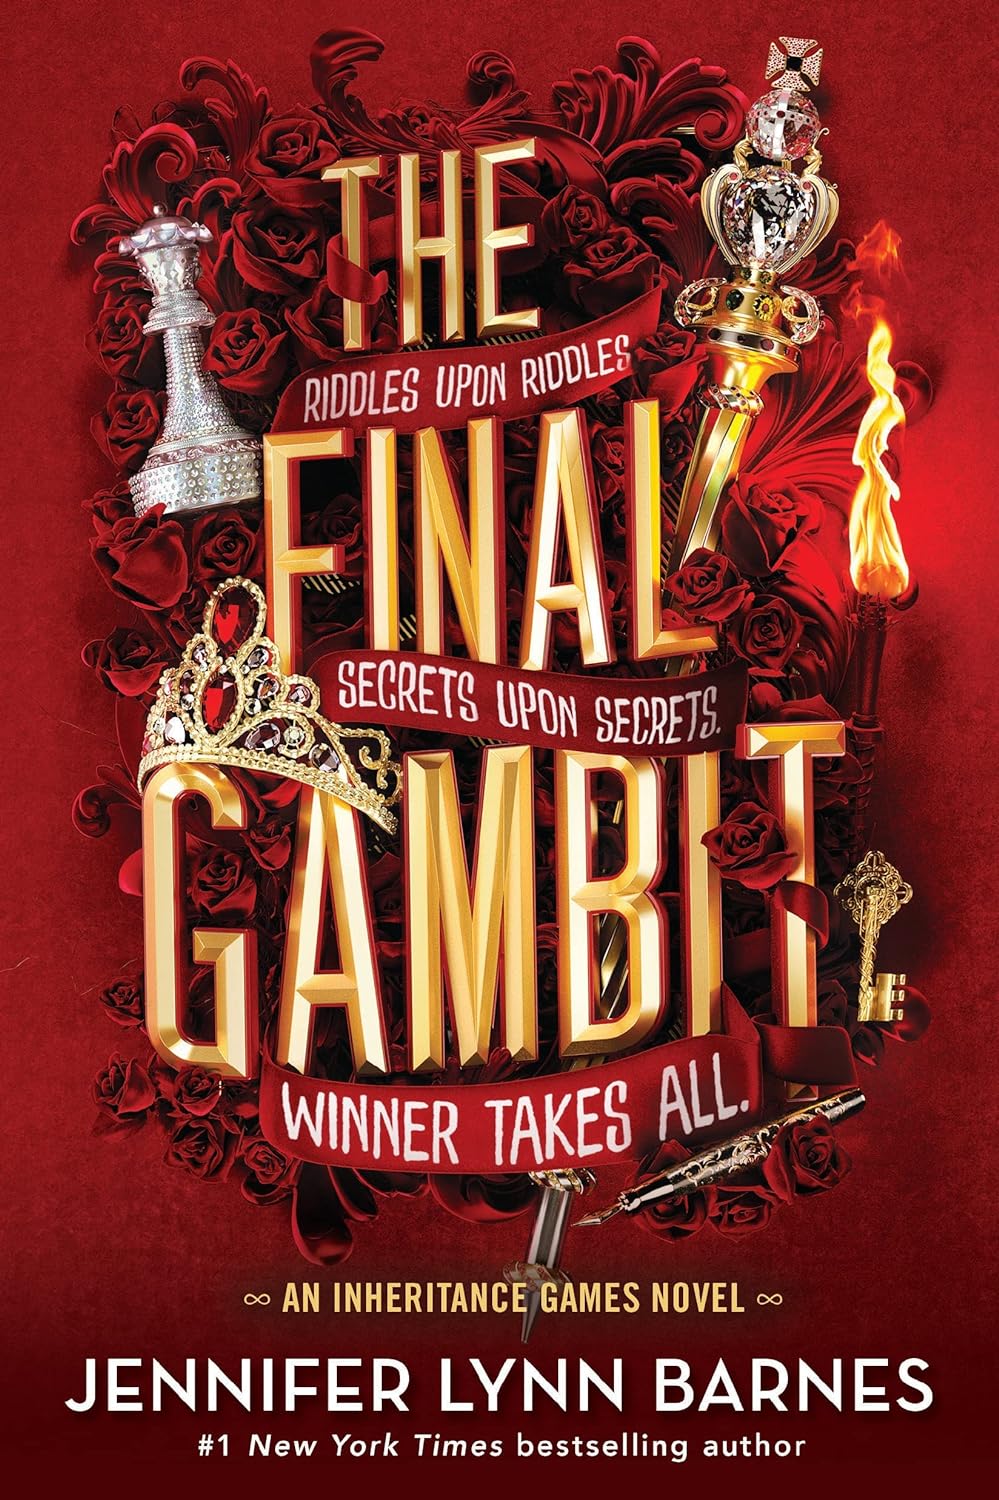 The Final Gambit Book Series, Hardcover edition The Final Gambit, young adult fiction Book, August 3